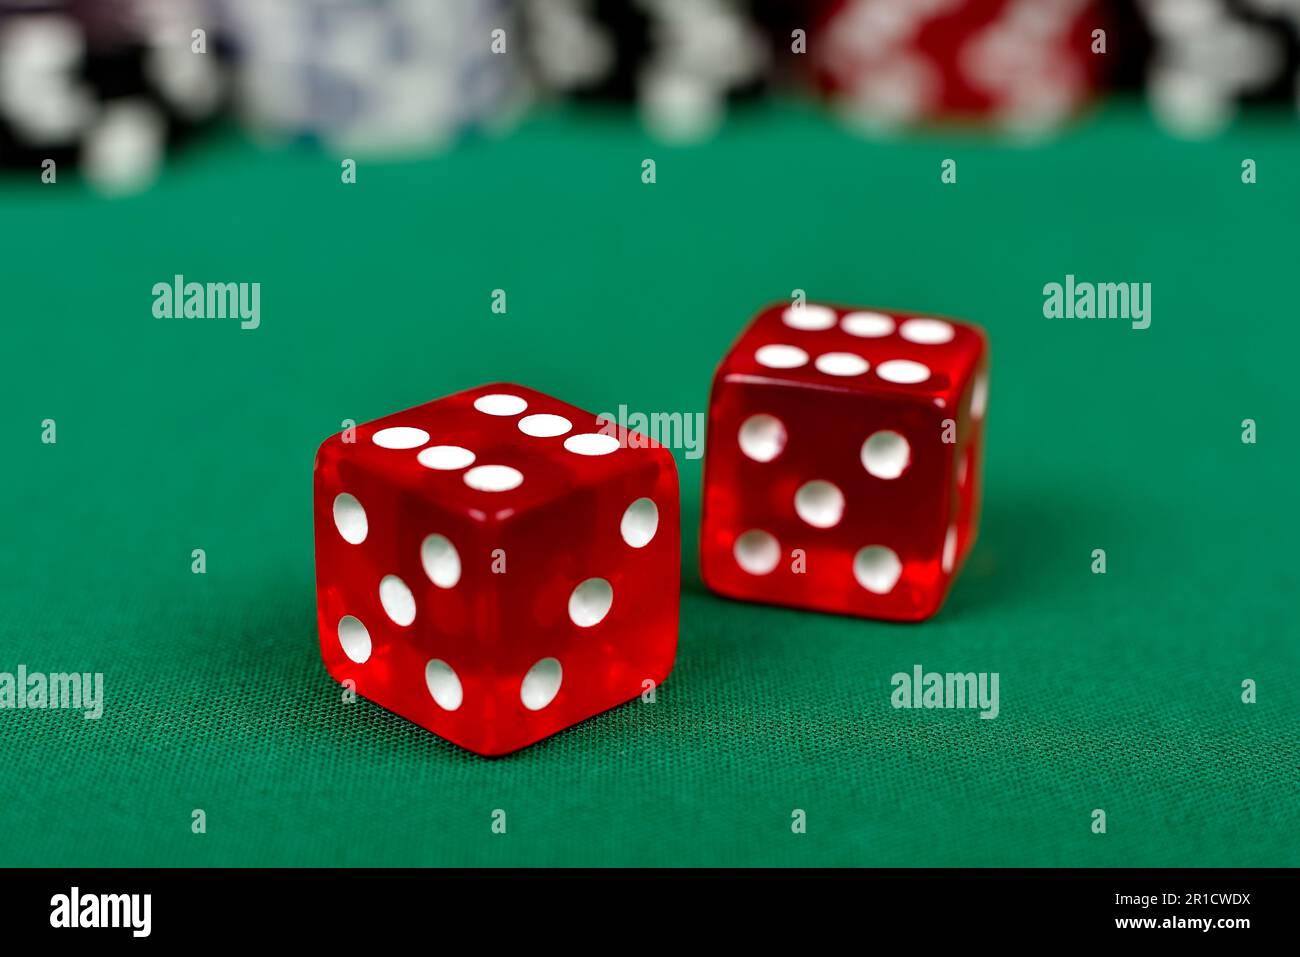 two red dice on green table Stock Photo